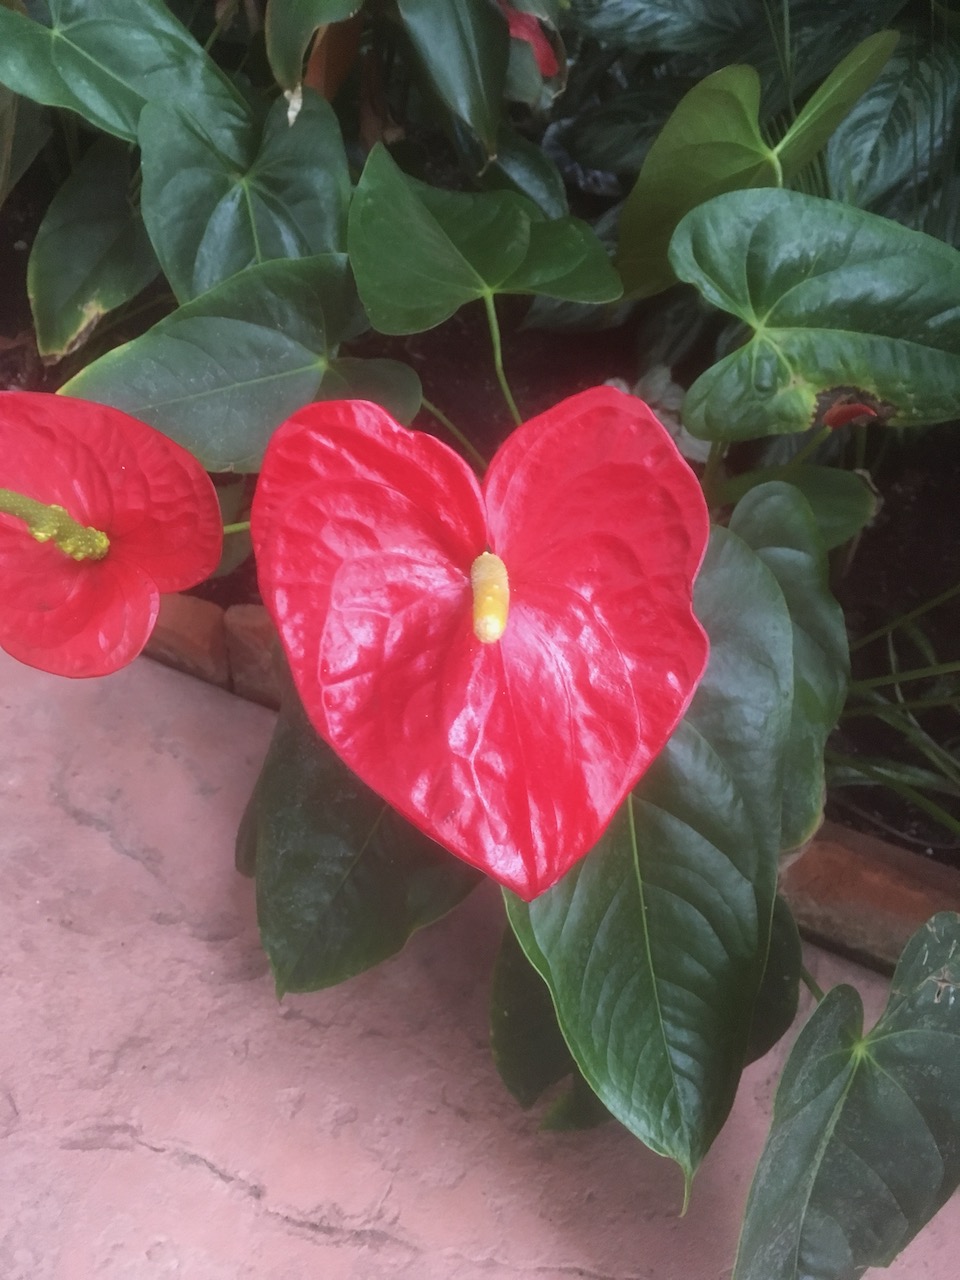 A heart-shaped red flower